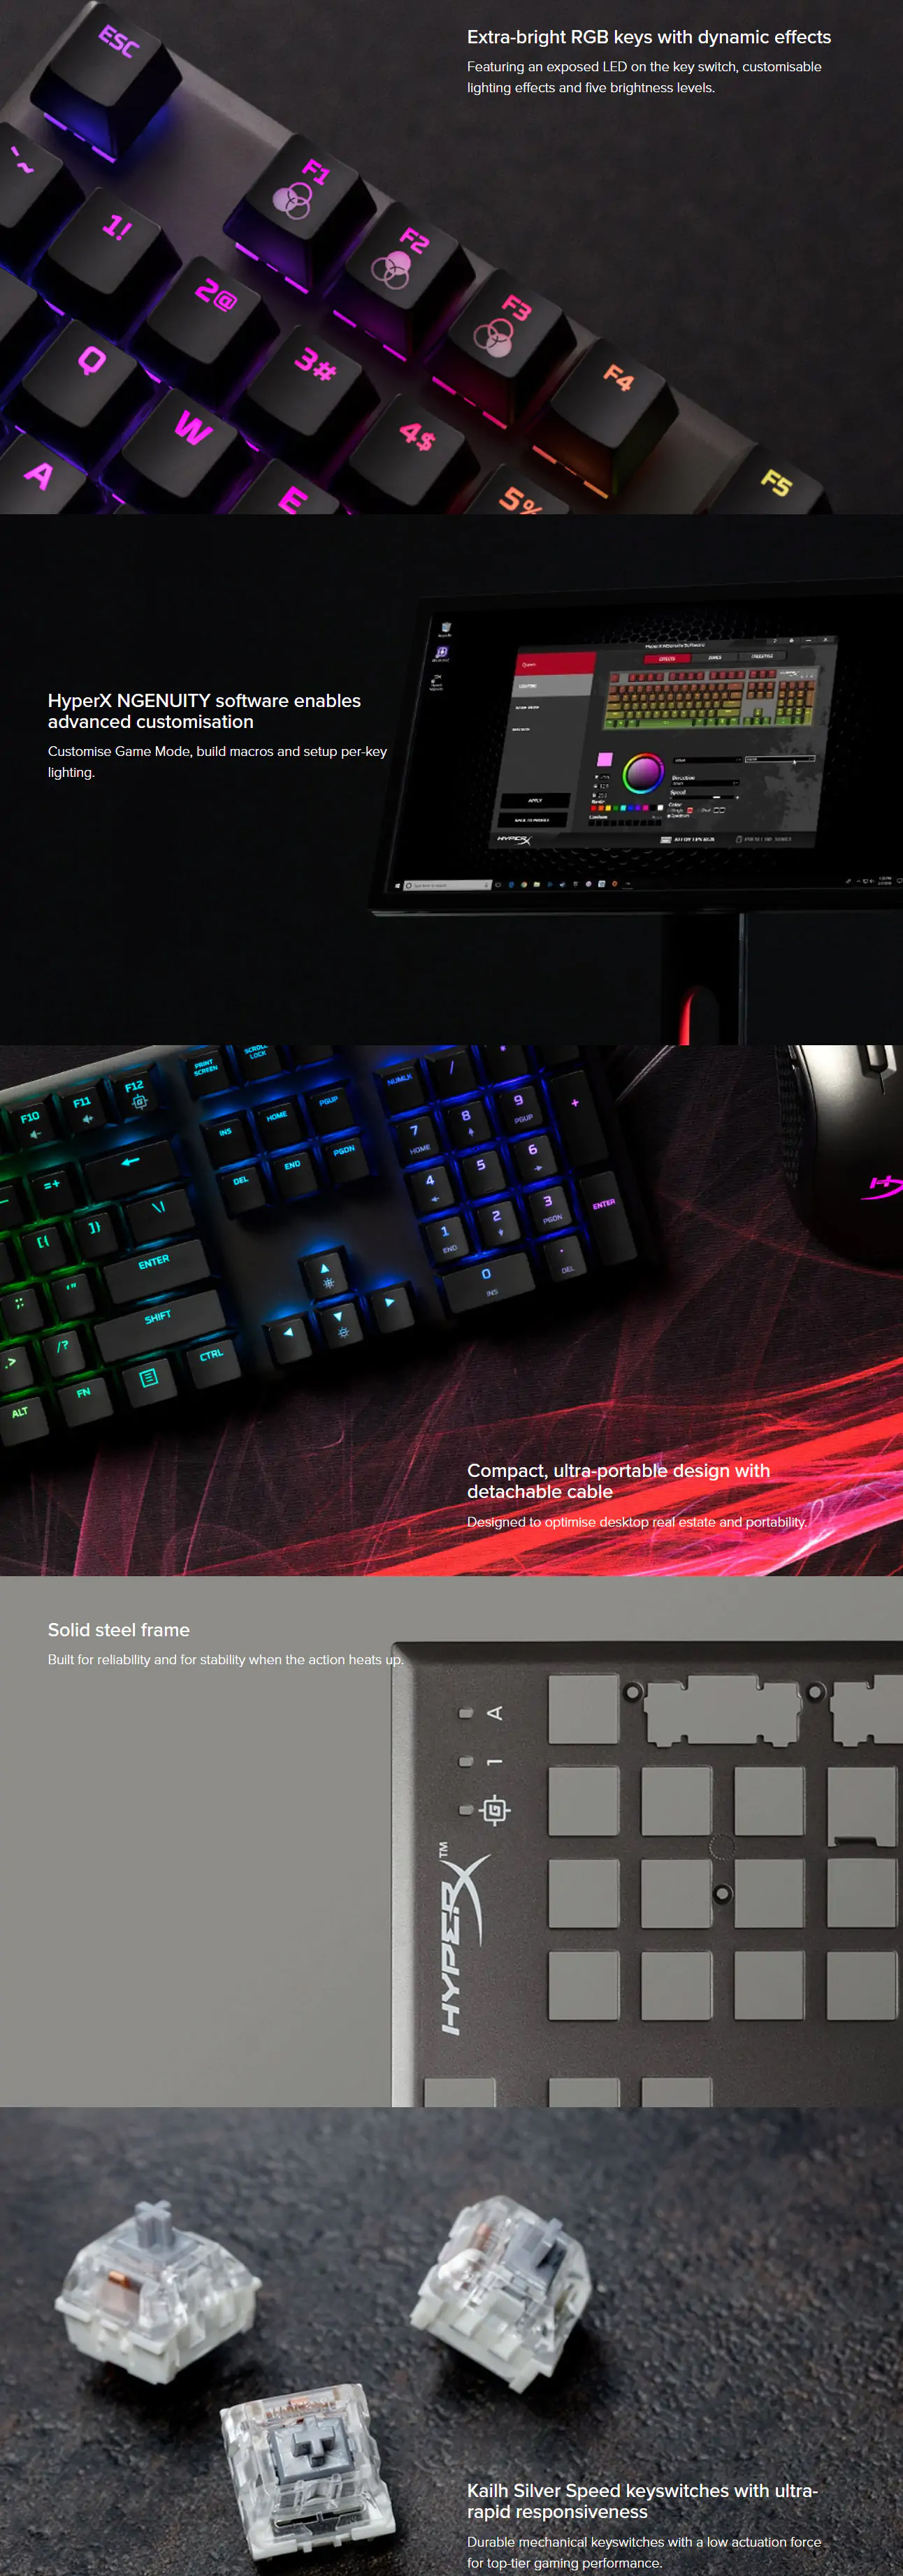 Keyboards-HyperX-Alloy-FPS-RGB-Mechanical-Gaming-Keyboard-Kailh-Silver-Speed-Switches-2